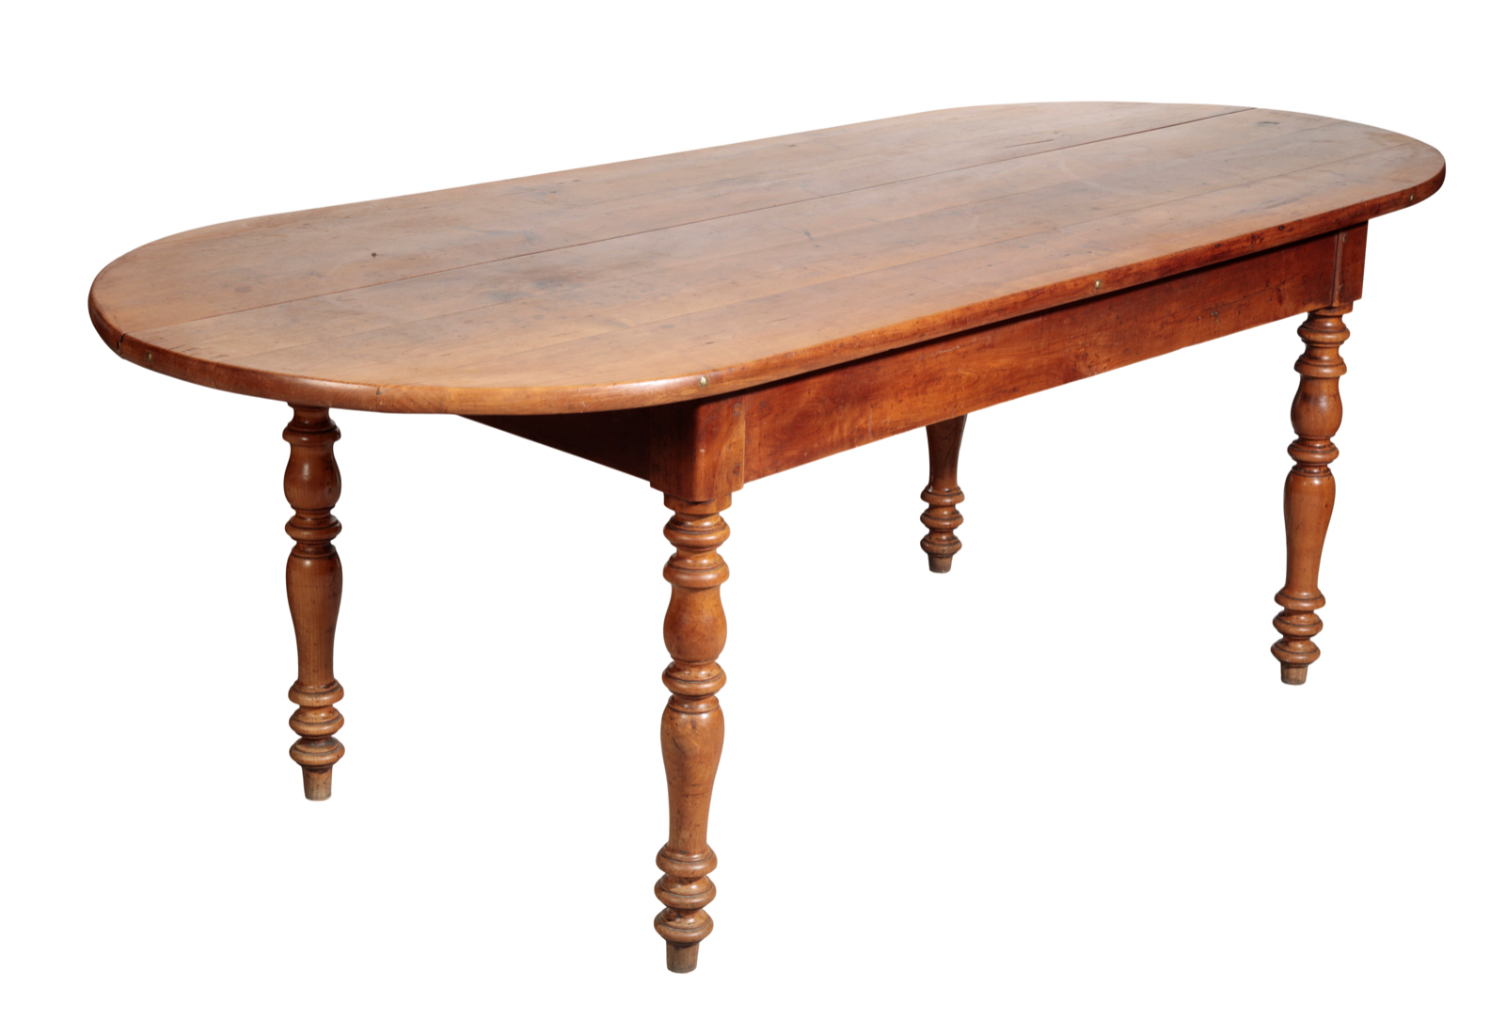 A FRUITWOOD DINING TABLE the top of